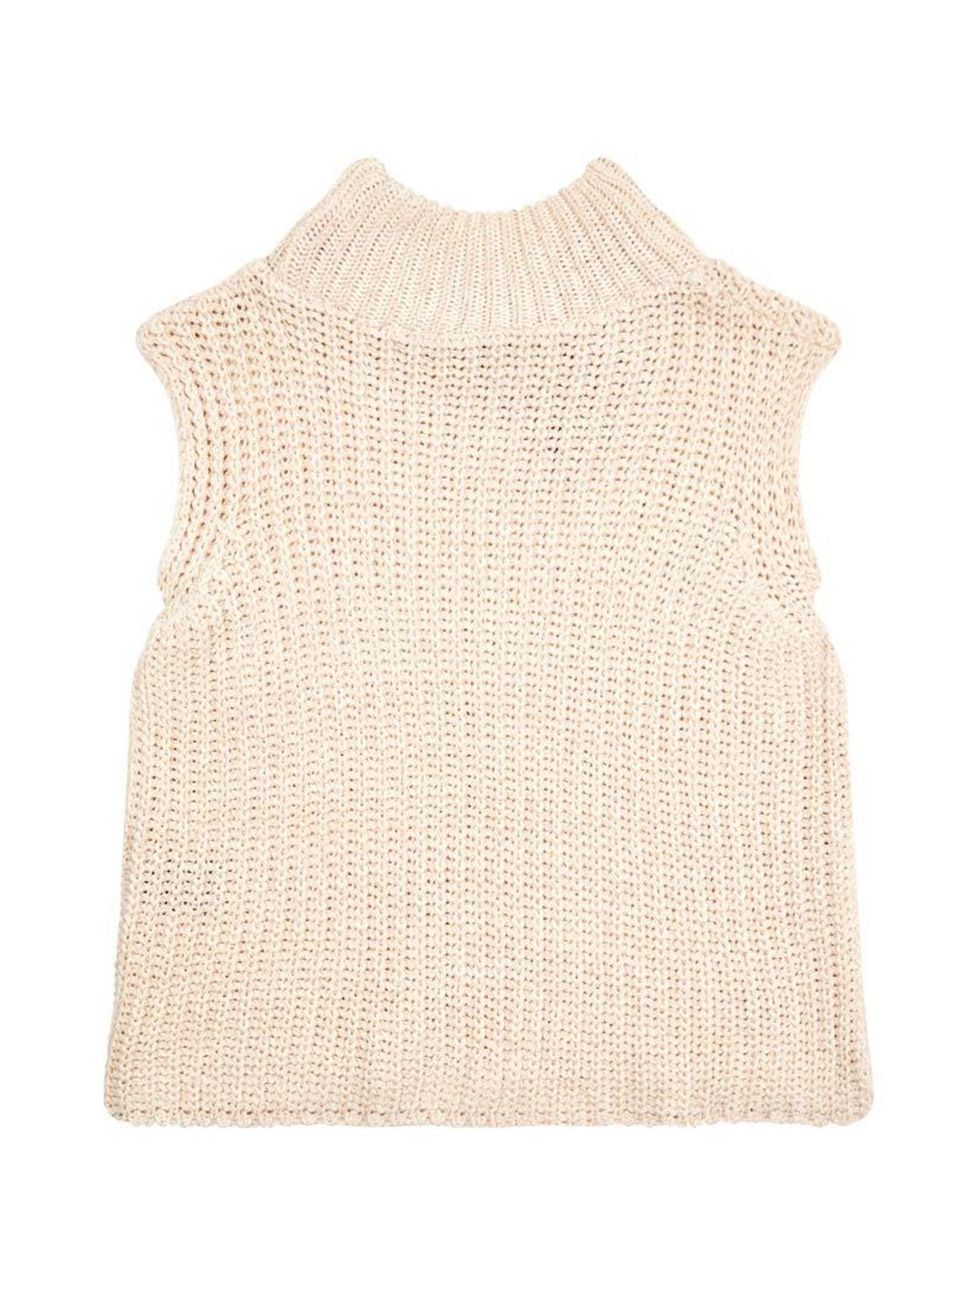 <p>Acting Deputy Chief Sub-Editor Charlotte Cox is showing off her yoga-toned arms (again) in this pastel knit.</p>

<p>Sparkle & Fade jumper, £35 at <a href="http://www.urbanoutfitters.com/uk/catalog/productdetail.jsp?id=5114441541130&parentid=WOMENS-JUM